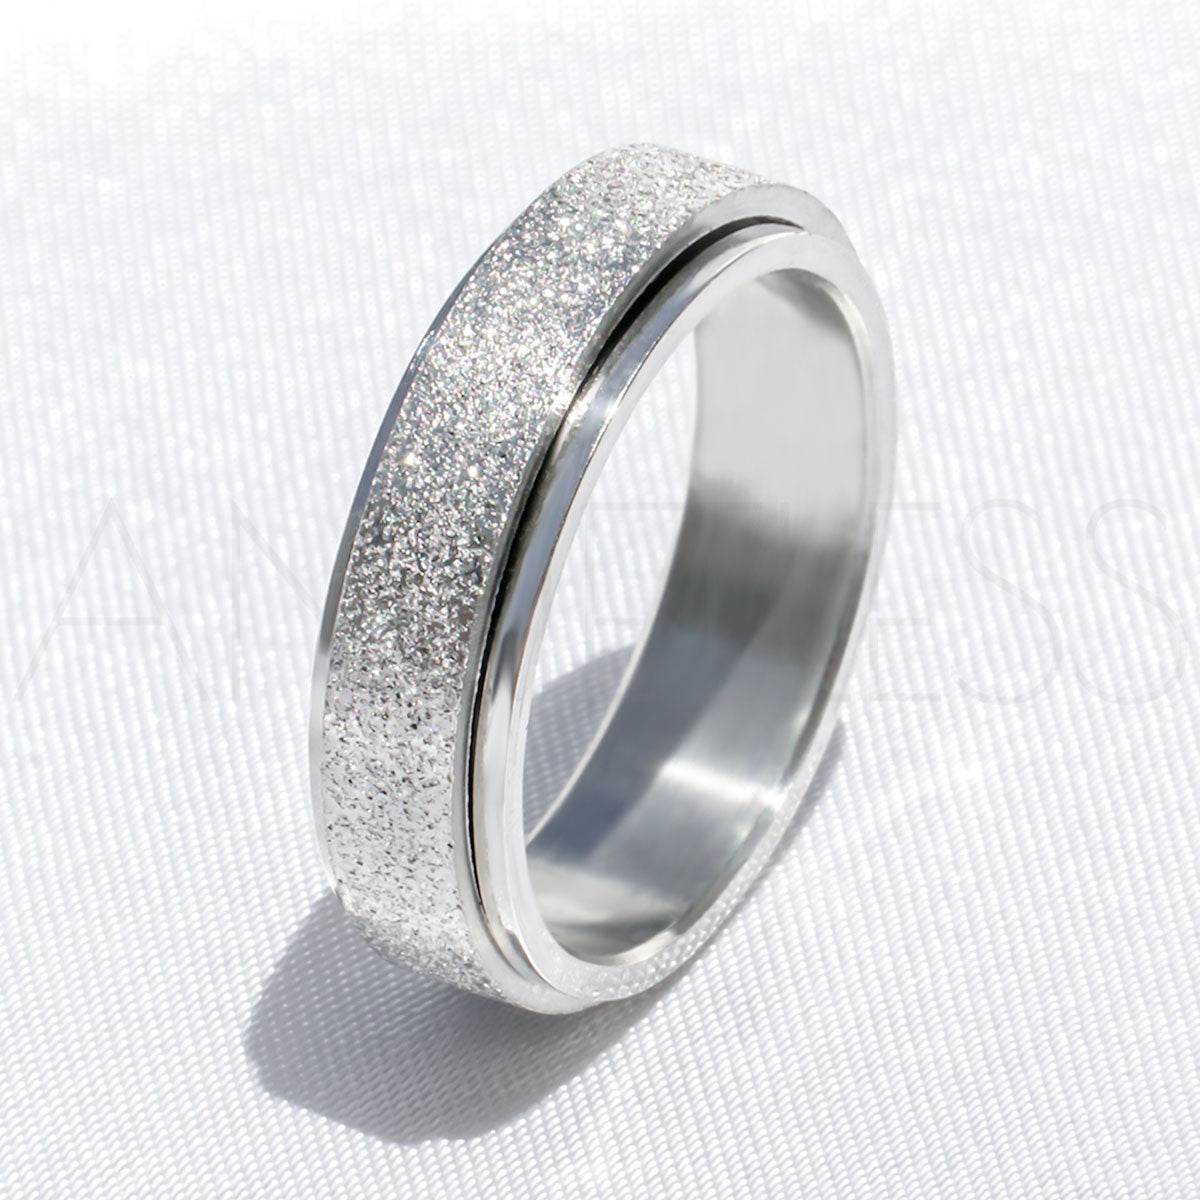 Sparkly Silver Anxiety Ring on White Background